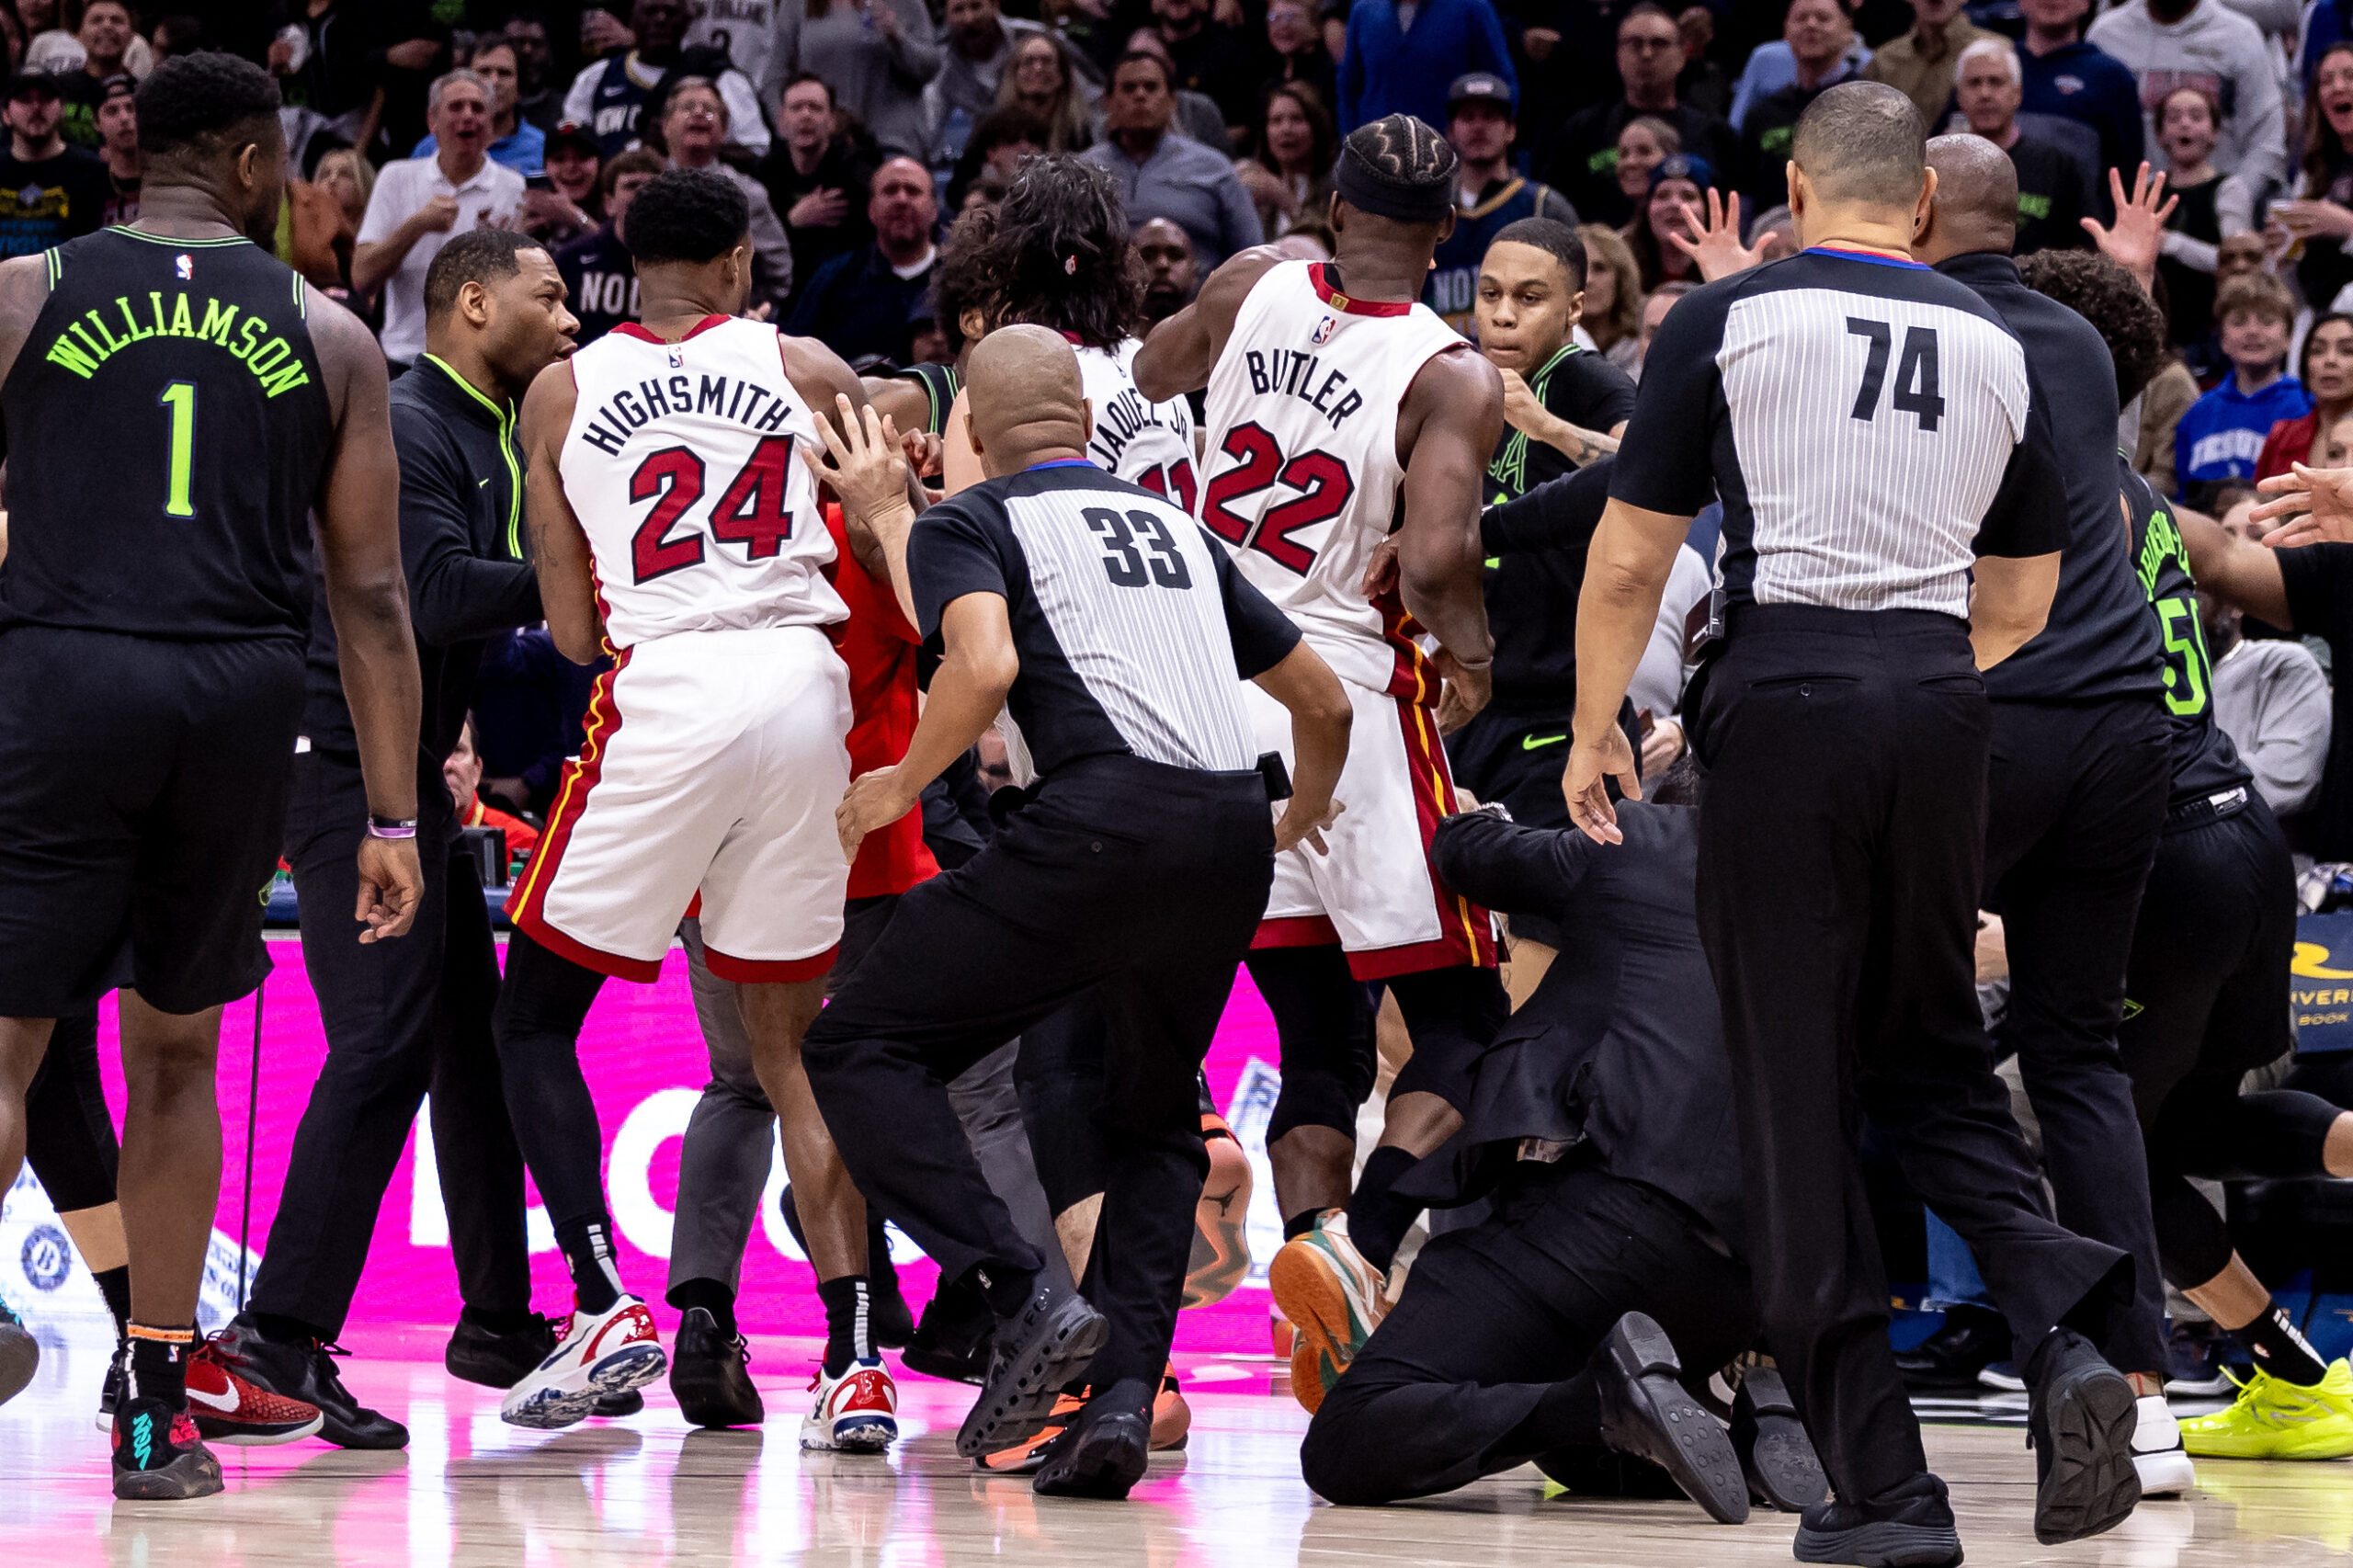 Too heated: Butler, 3 others ejected as tempers flare in Heat-Pelicans duel